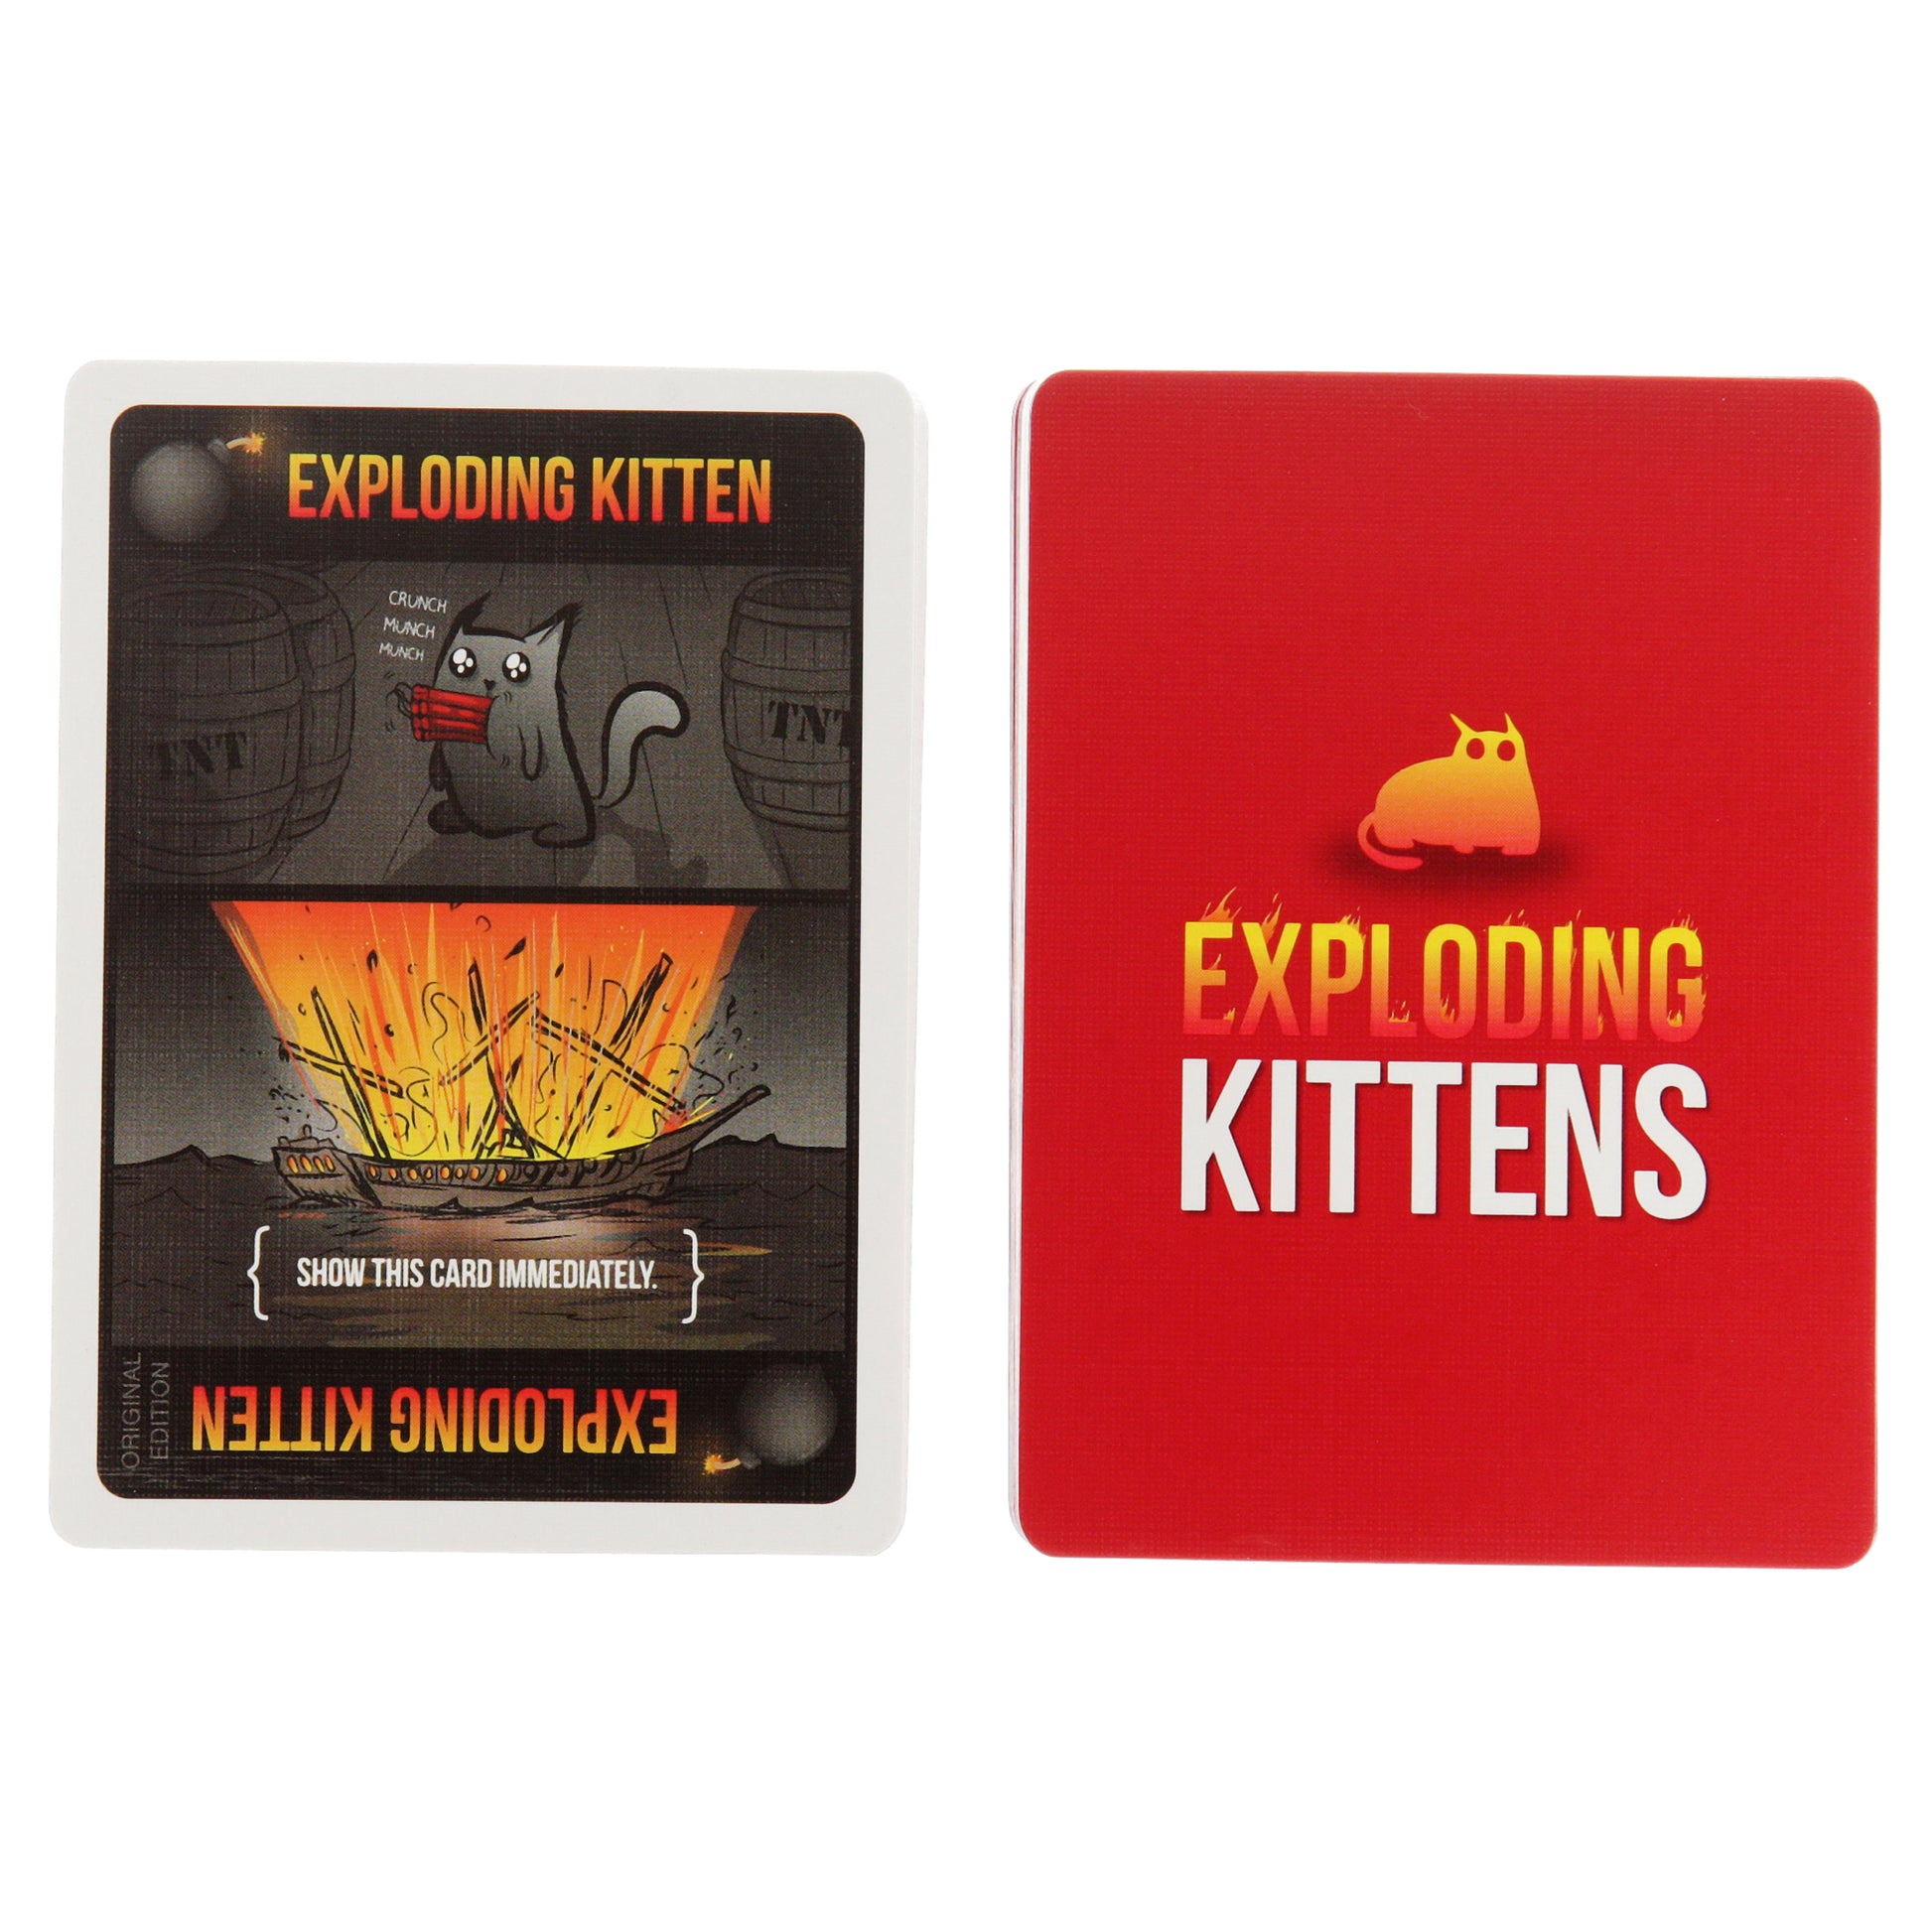 Exploding Kittens Original Edition Card Game, Ages 12 & up, 2-5 Player –